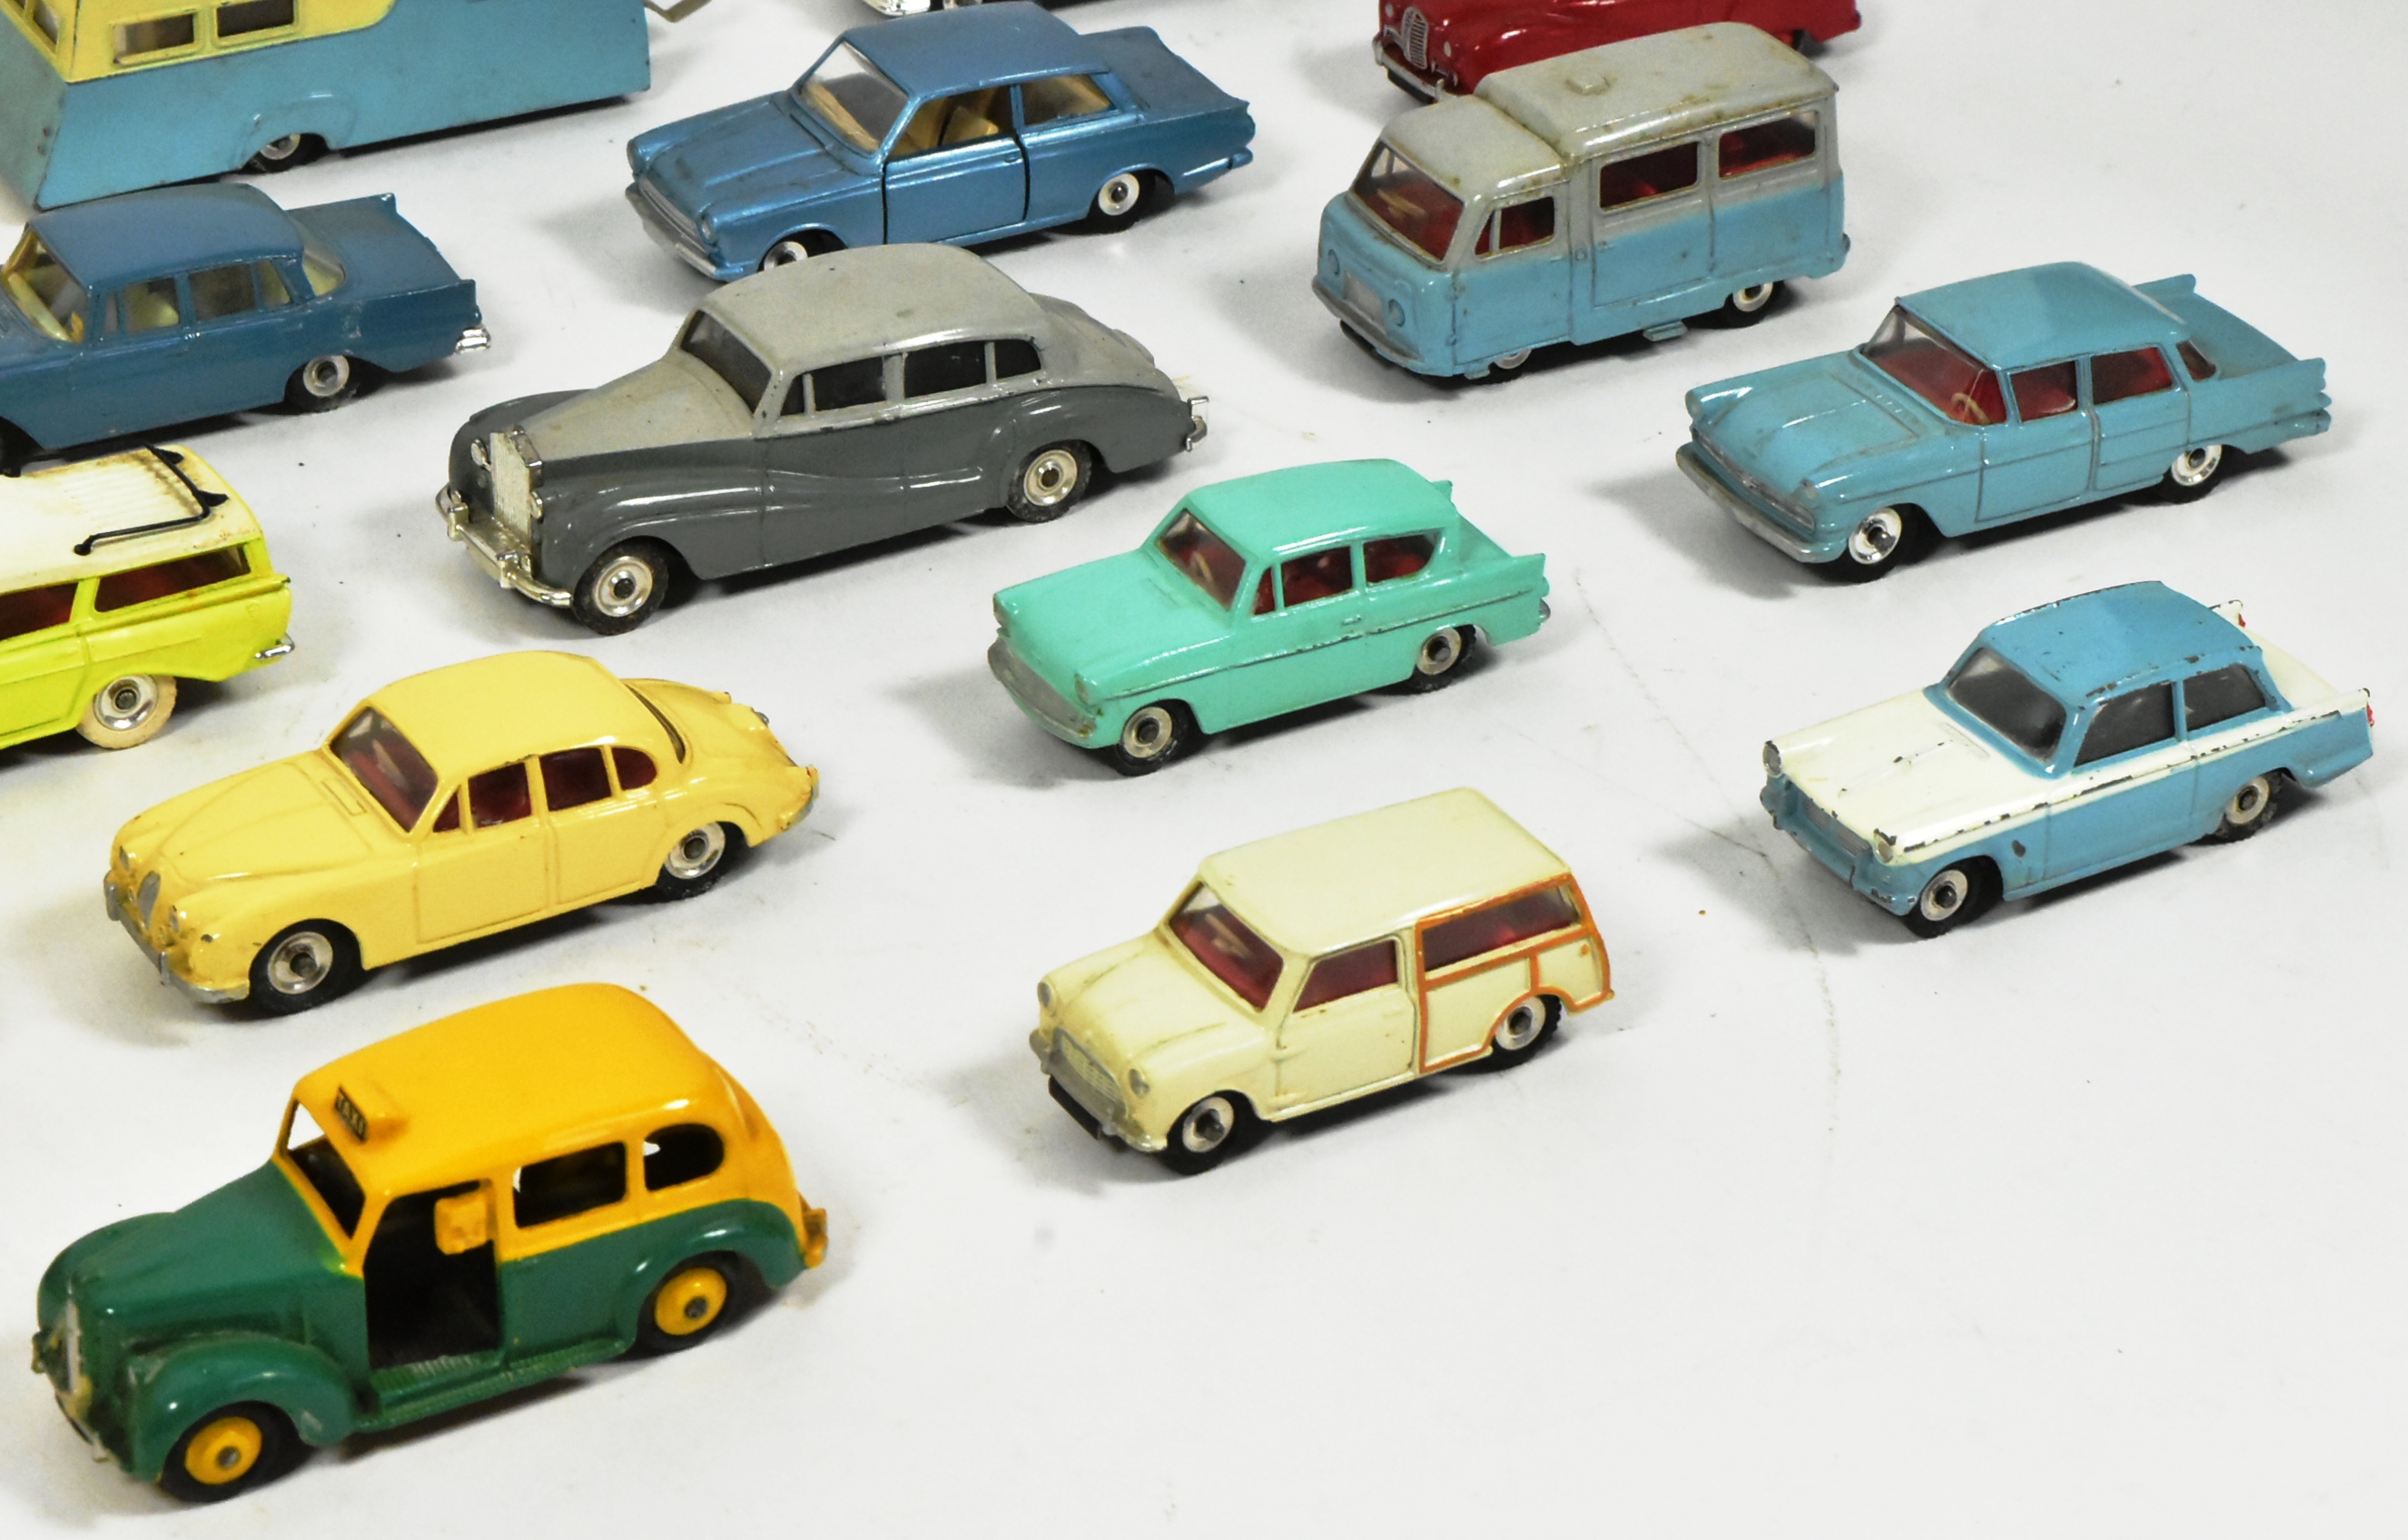 DIECAST - COLLECTION OF VINTAGE DINKY TOYS DIECAST MODELS - Image 5 of 6